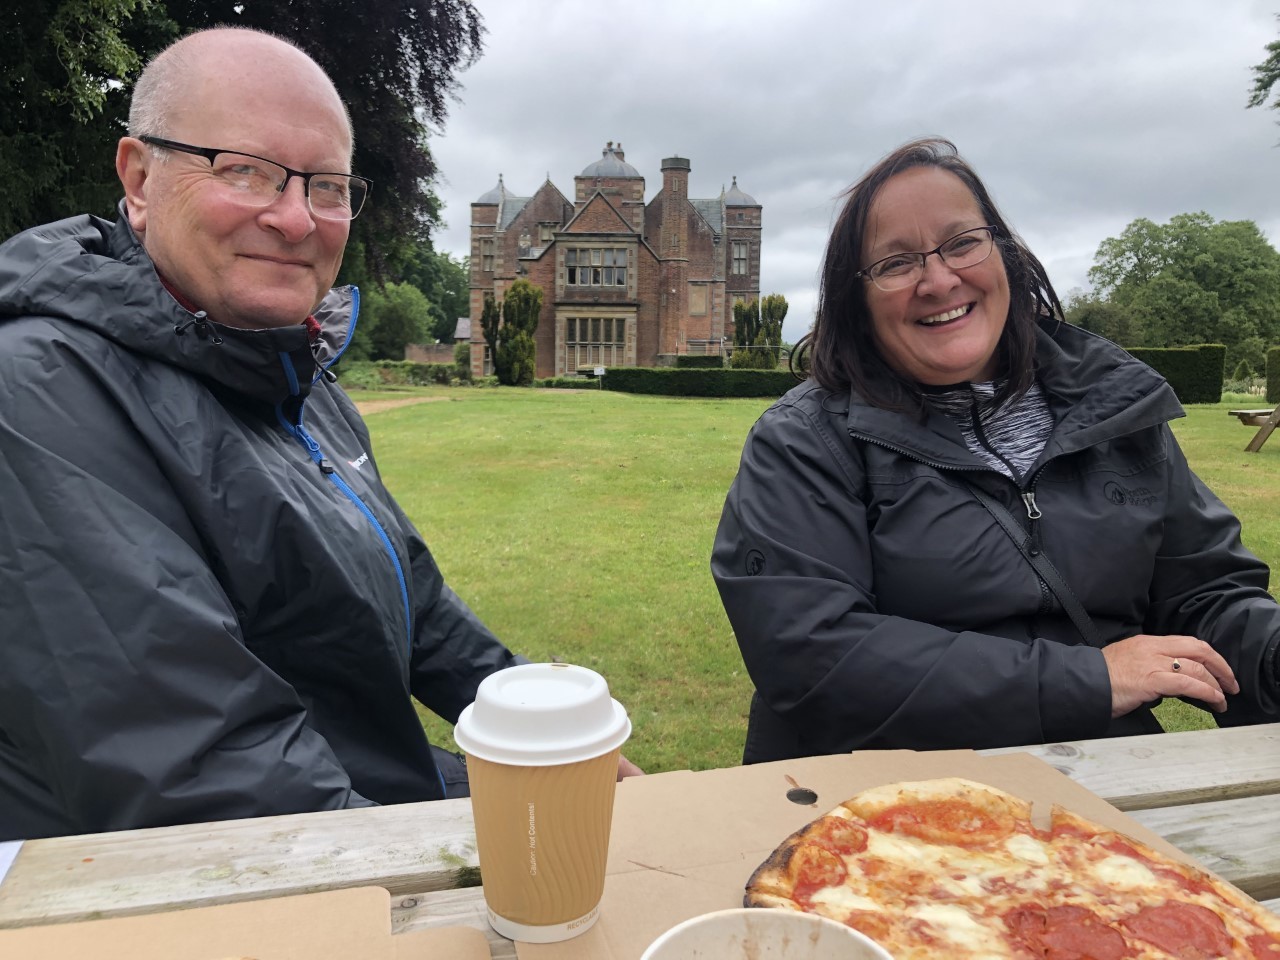 During the Easter holiday visitors can enjoy a pizza picnic, as local firm Proper Pizzas return to the grounds by popular demand